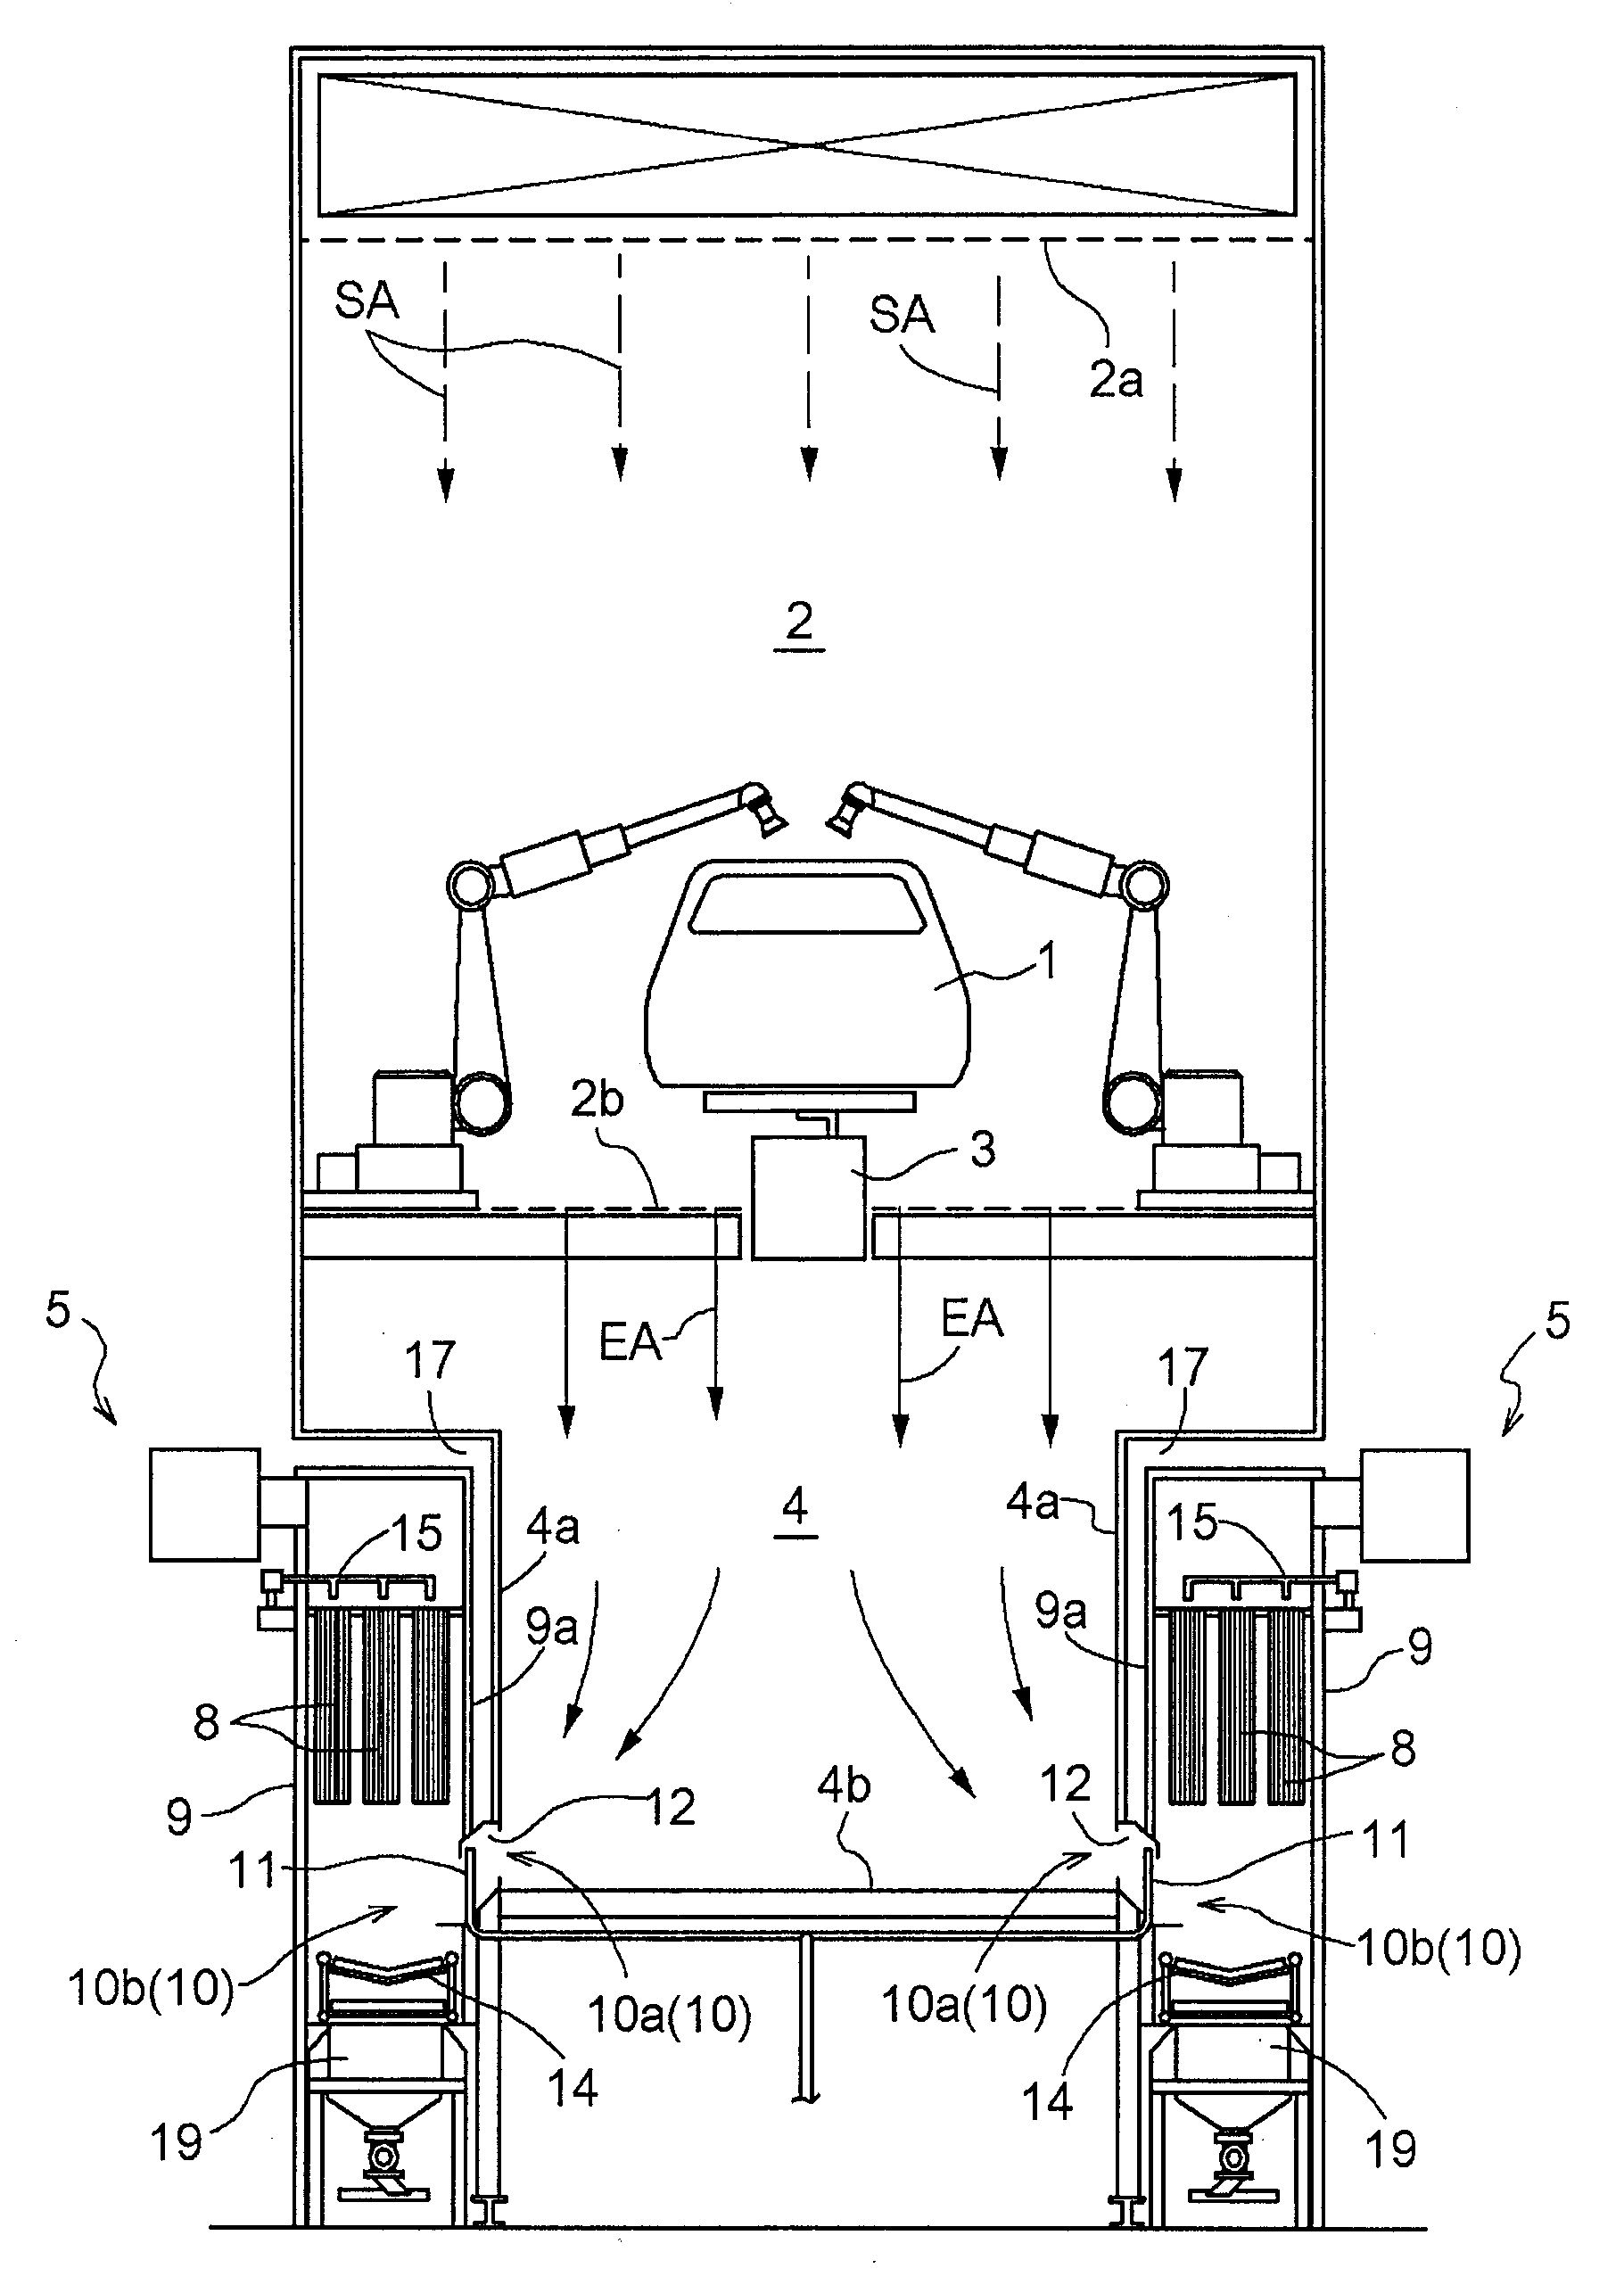 Filtering apparatus, spray painting booth with the filtering apparatus, and simplified spray painting booth with the filtering apparatus